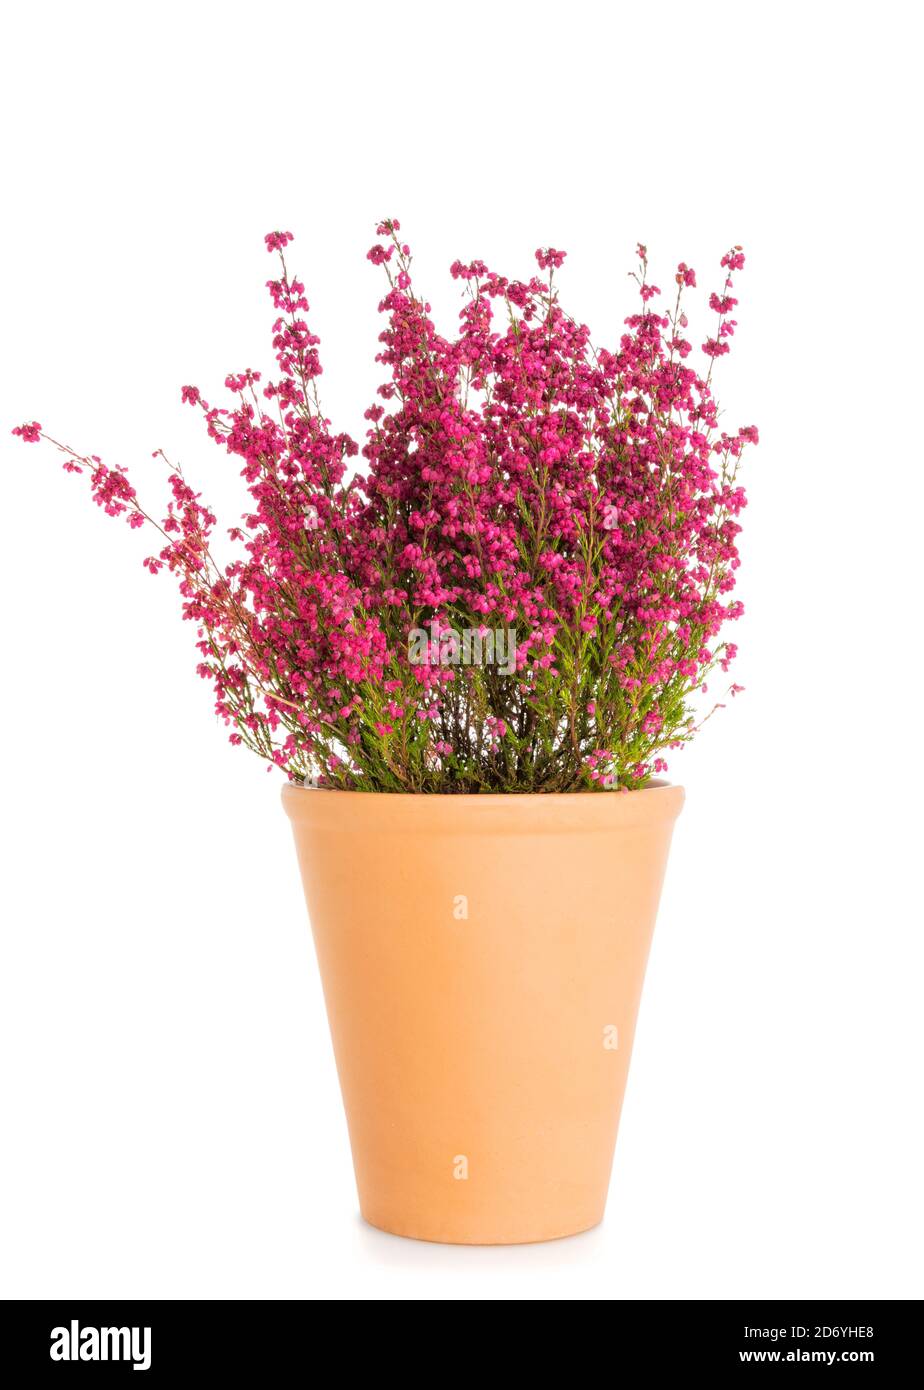 Blooming purple broom heather plant - erica gracilis - in terracotta flower pot isolated on white background Stock Photo